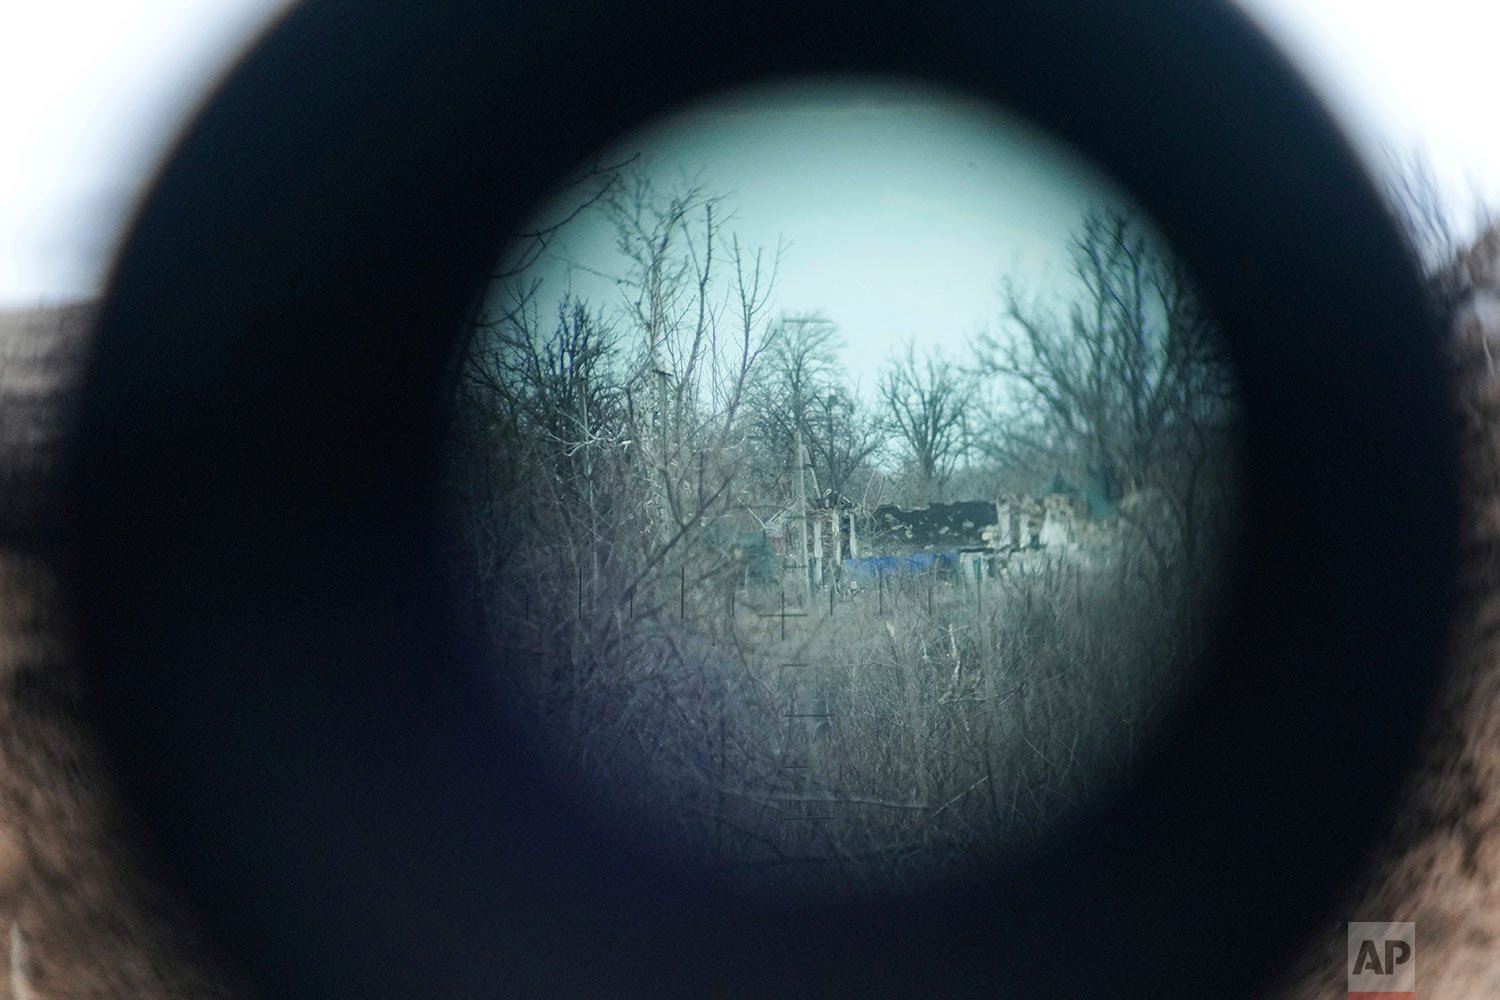  The gray area is visible through the periscope on a Ukrainian Army position at the line of separation between Ukraine-held territory and rebel-held territory near Zolote, Ukraine, late Saturday, Feb. 19, 2022. (AP Photo/Evgeniy Maloletka) 